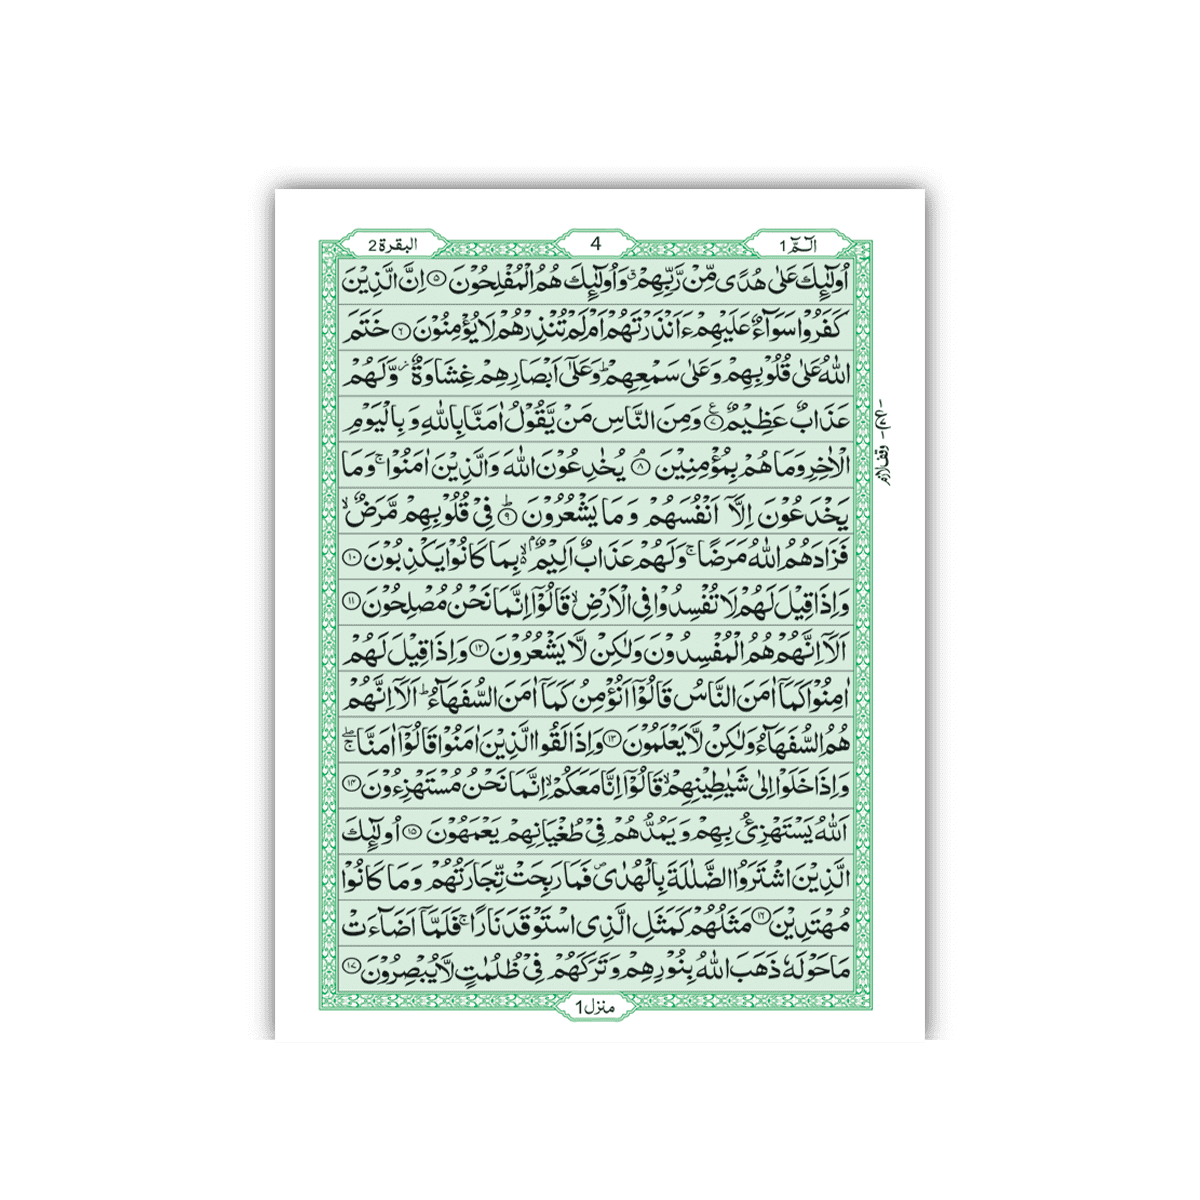 [55/SG] Al-Quran-ul-Kareem in 16 Lines (Without Translation) - Gift Edition